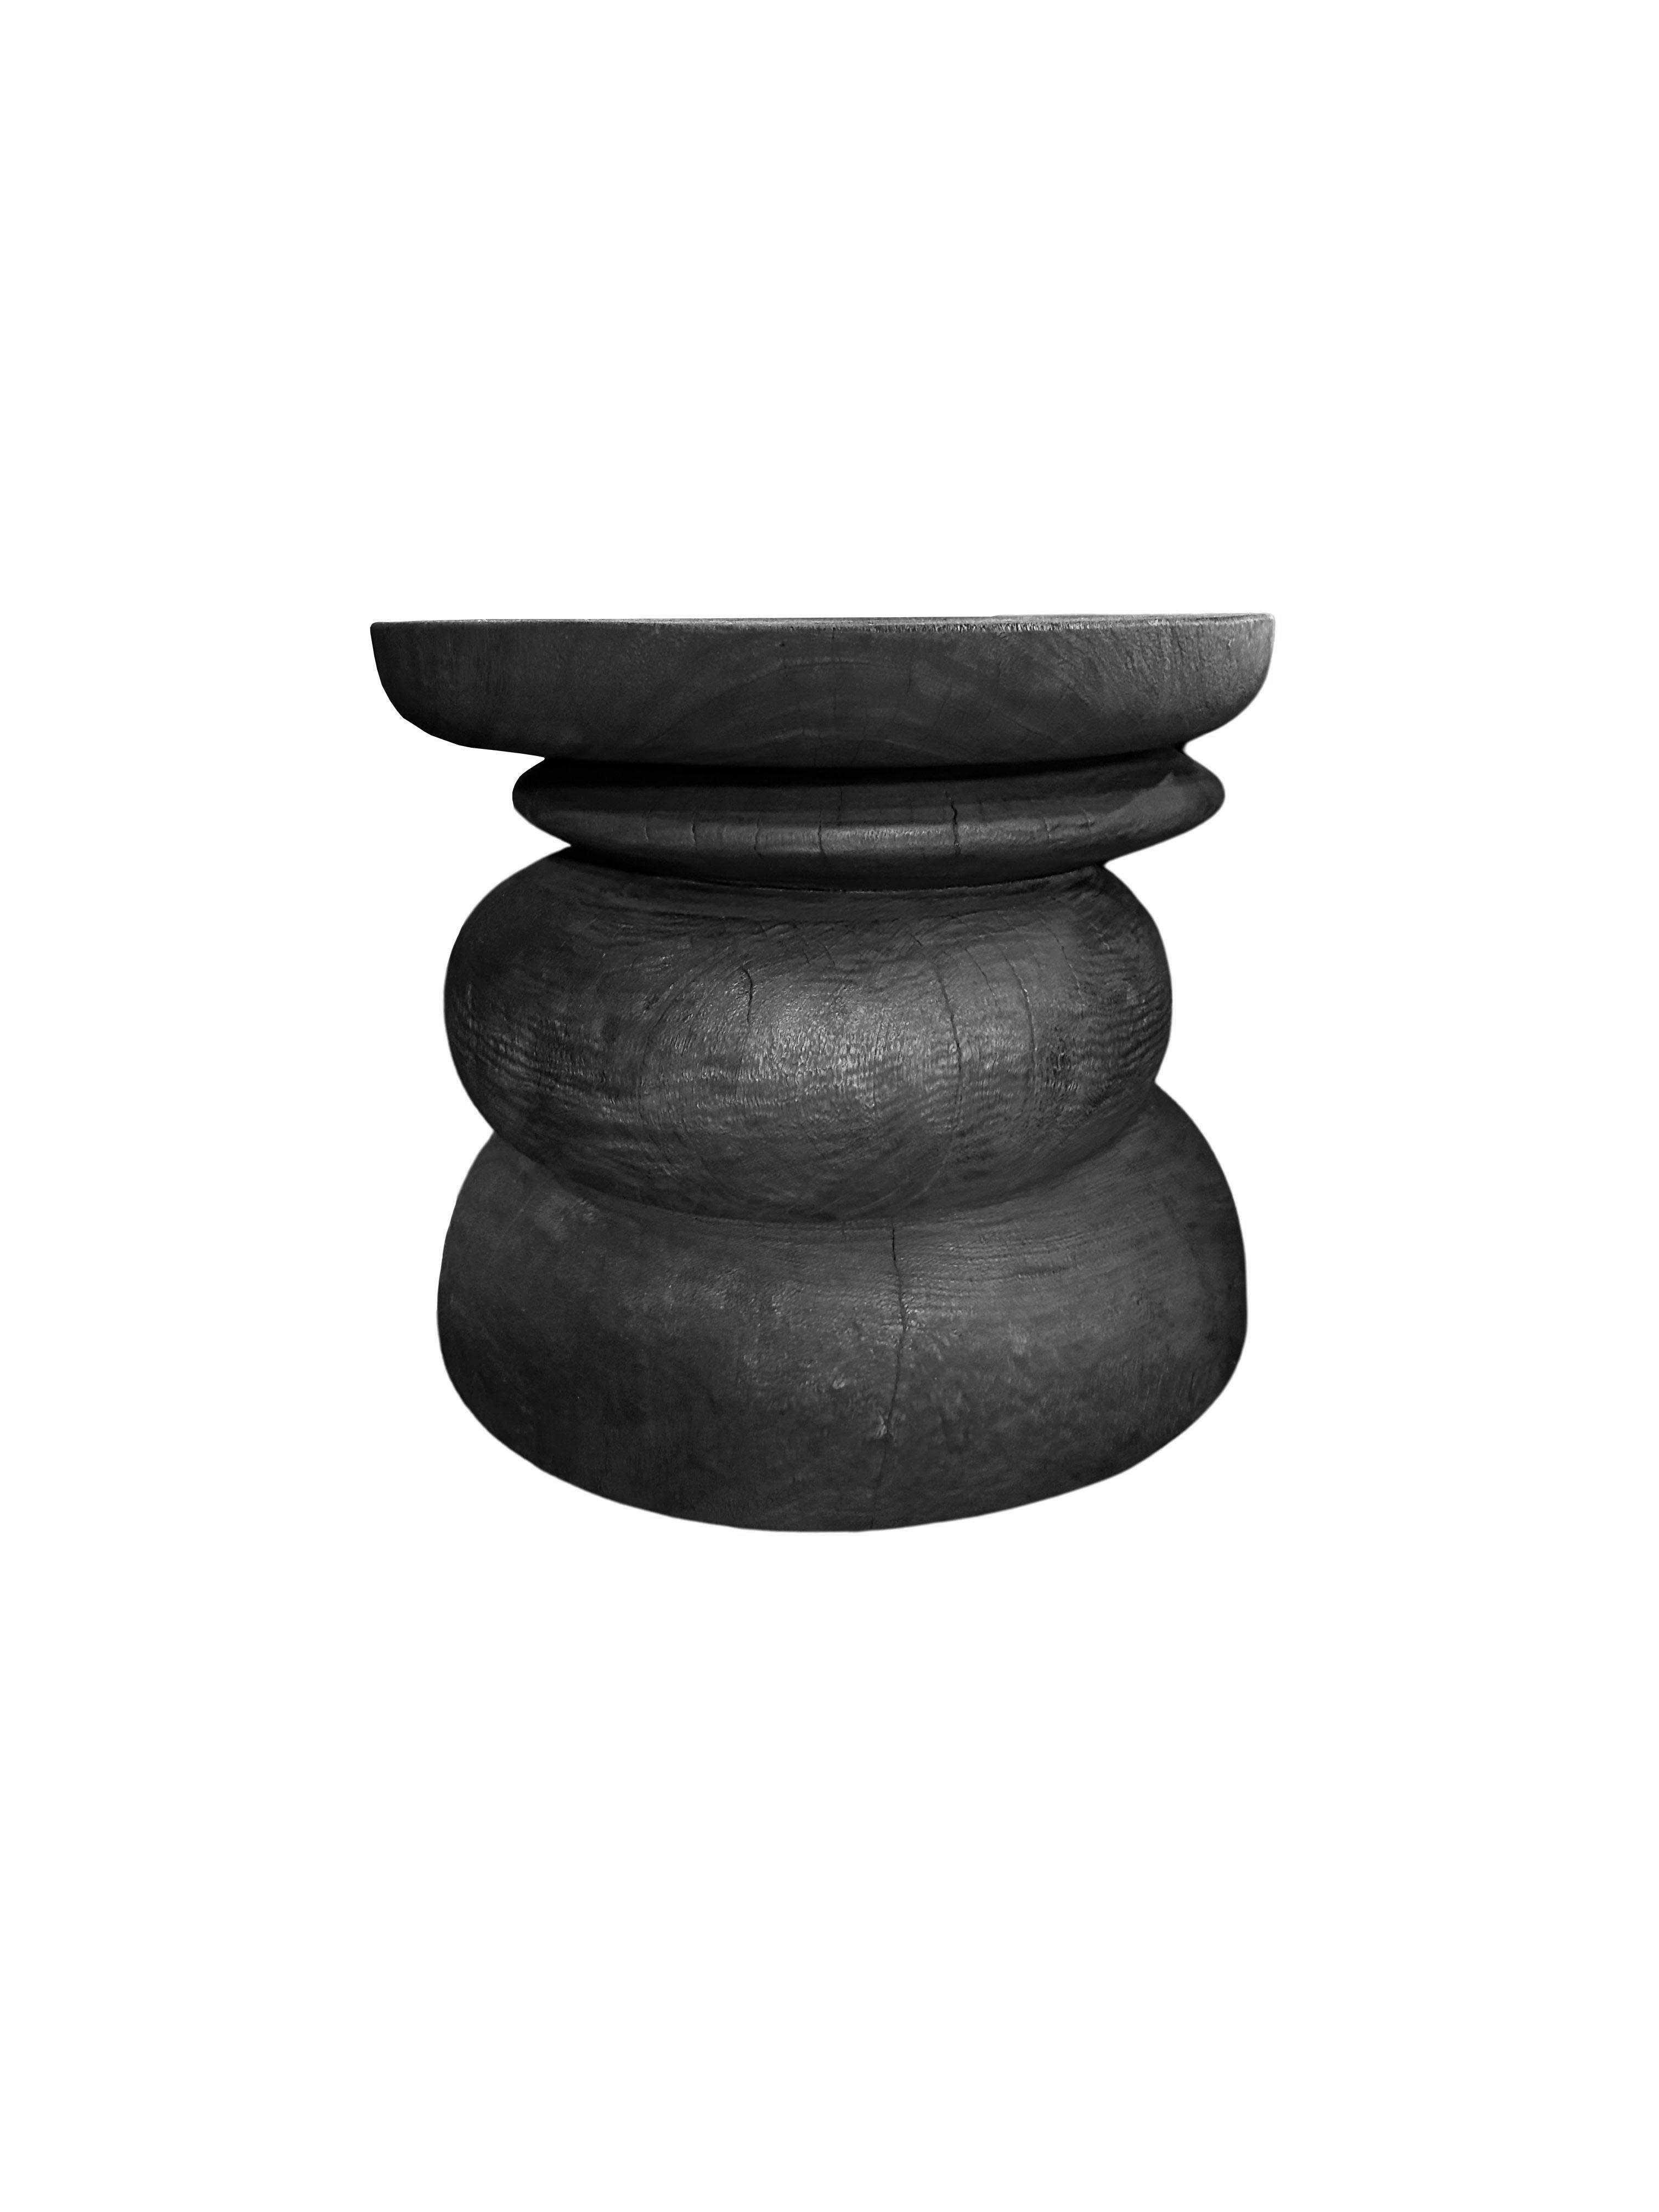 A wonderfully sculptural side table resembling a pile a river stones in a burnt finish. Its neutral pigment and subtle wood texture makes it perfect for any space. To achieve its black tone, the wood was burnt multiple times and then finished with a